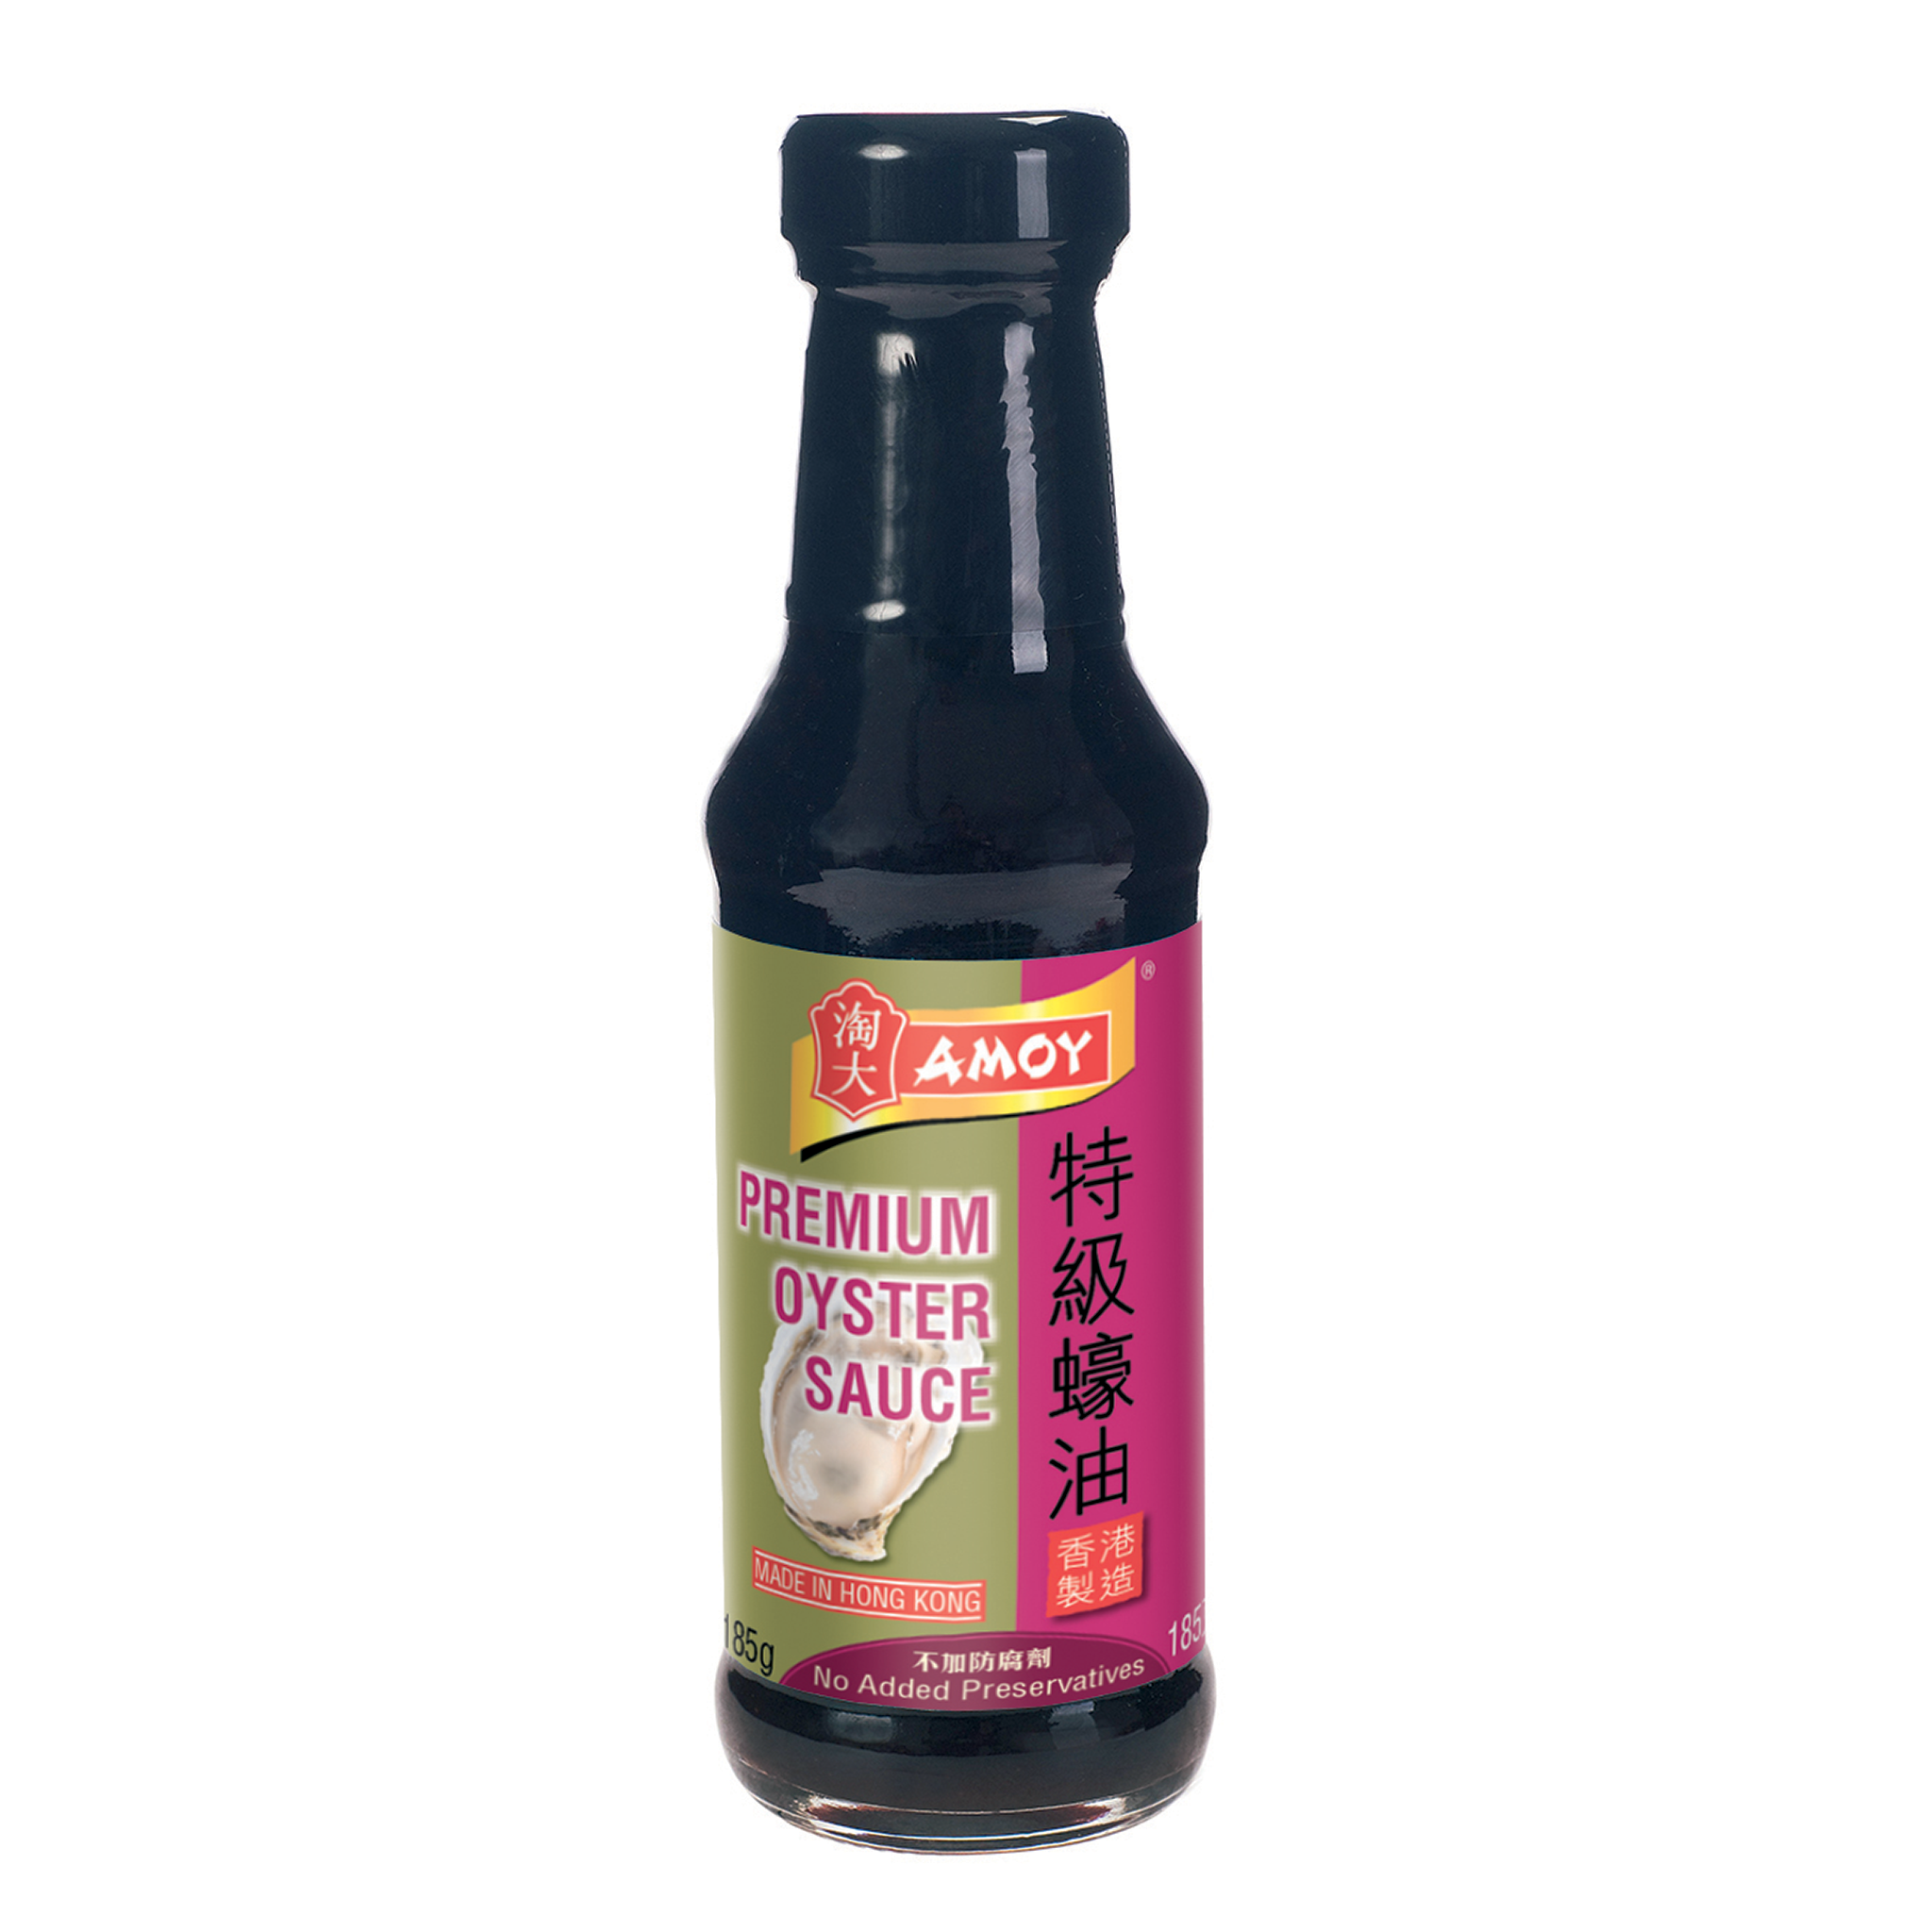 Premium Oyster Sauce 185g by Amoy